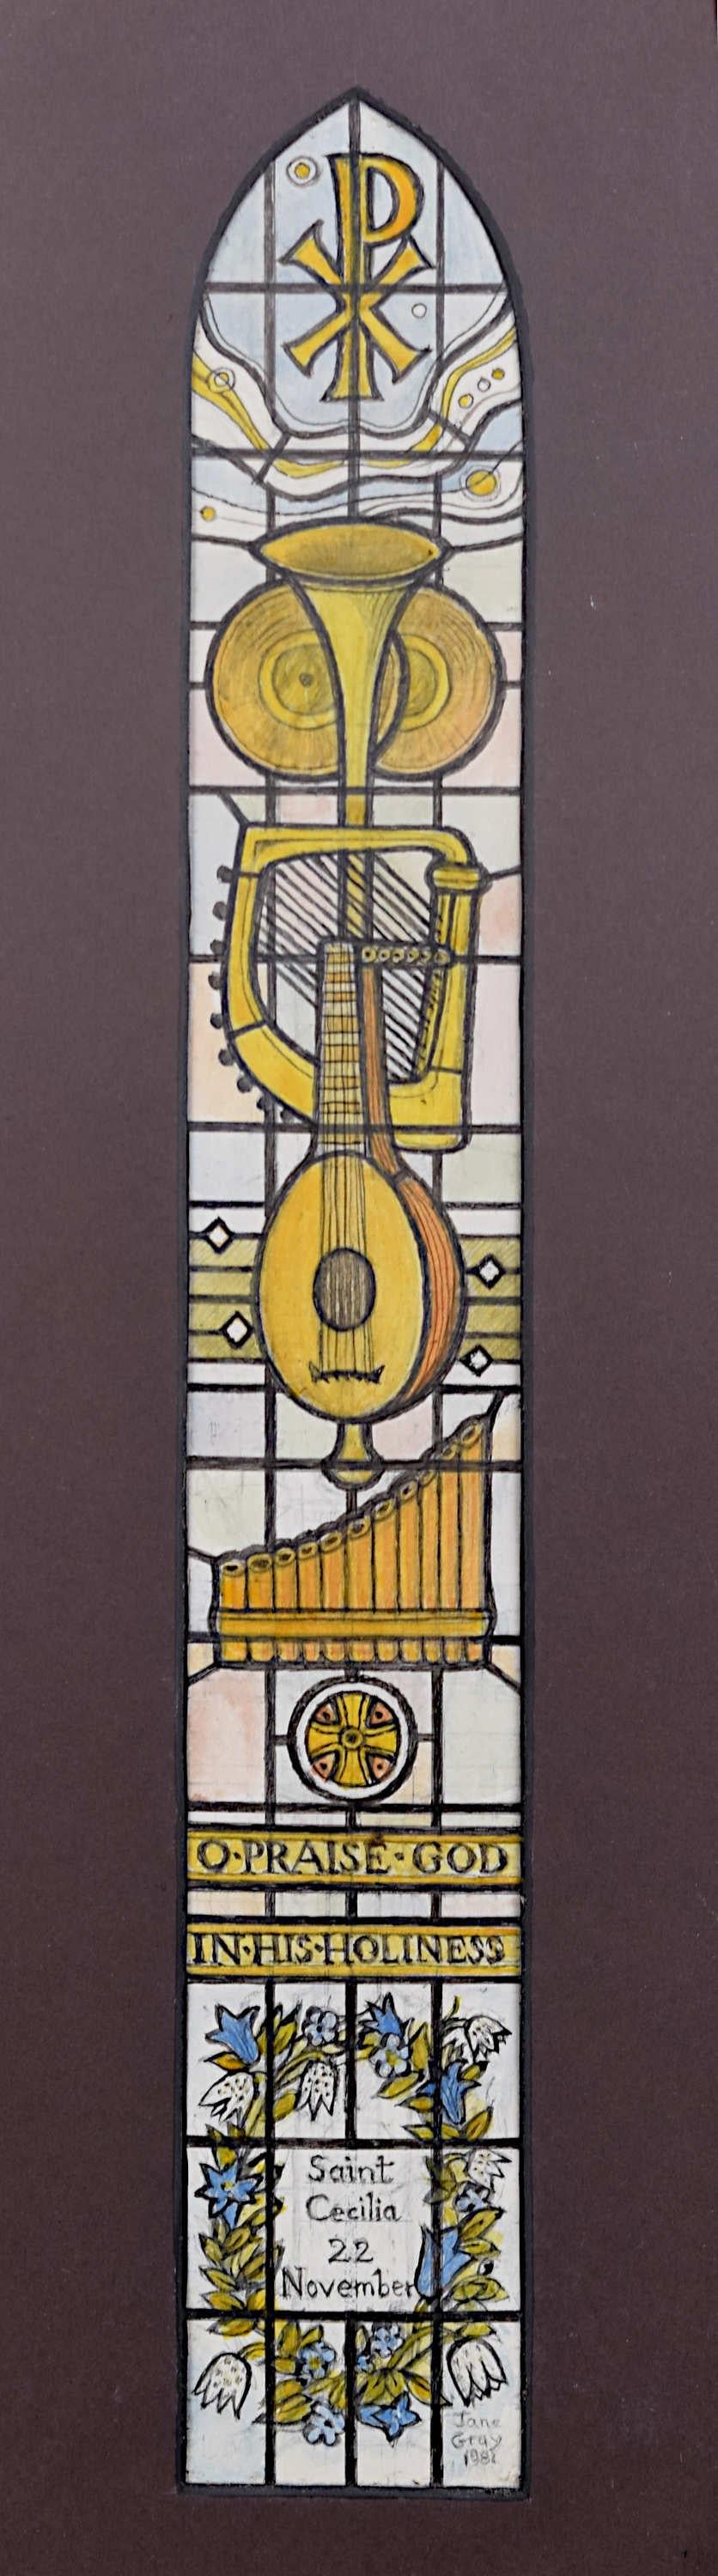 We acquired a series of watercolour stained glass designs from Jane Gray's studio. To find more scroll down to "More from this Seller" and below it click on "See all from this seller." 

Jane Gray (b.1931)
Stained Glass Design
Watercolour
29.5 x 4.5